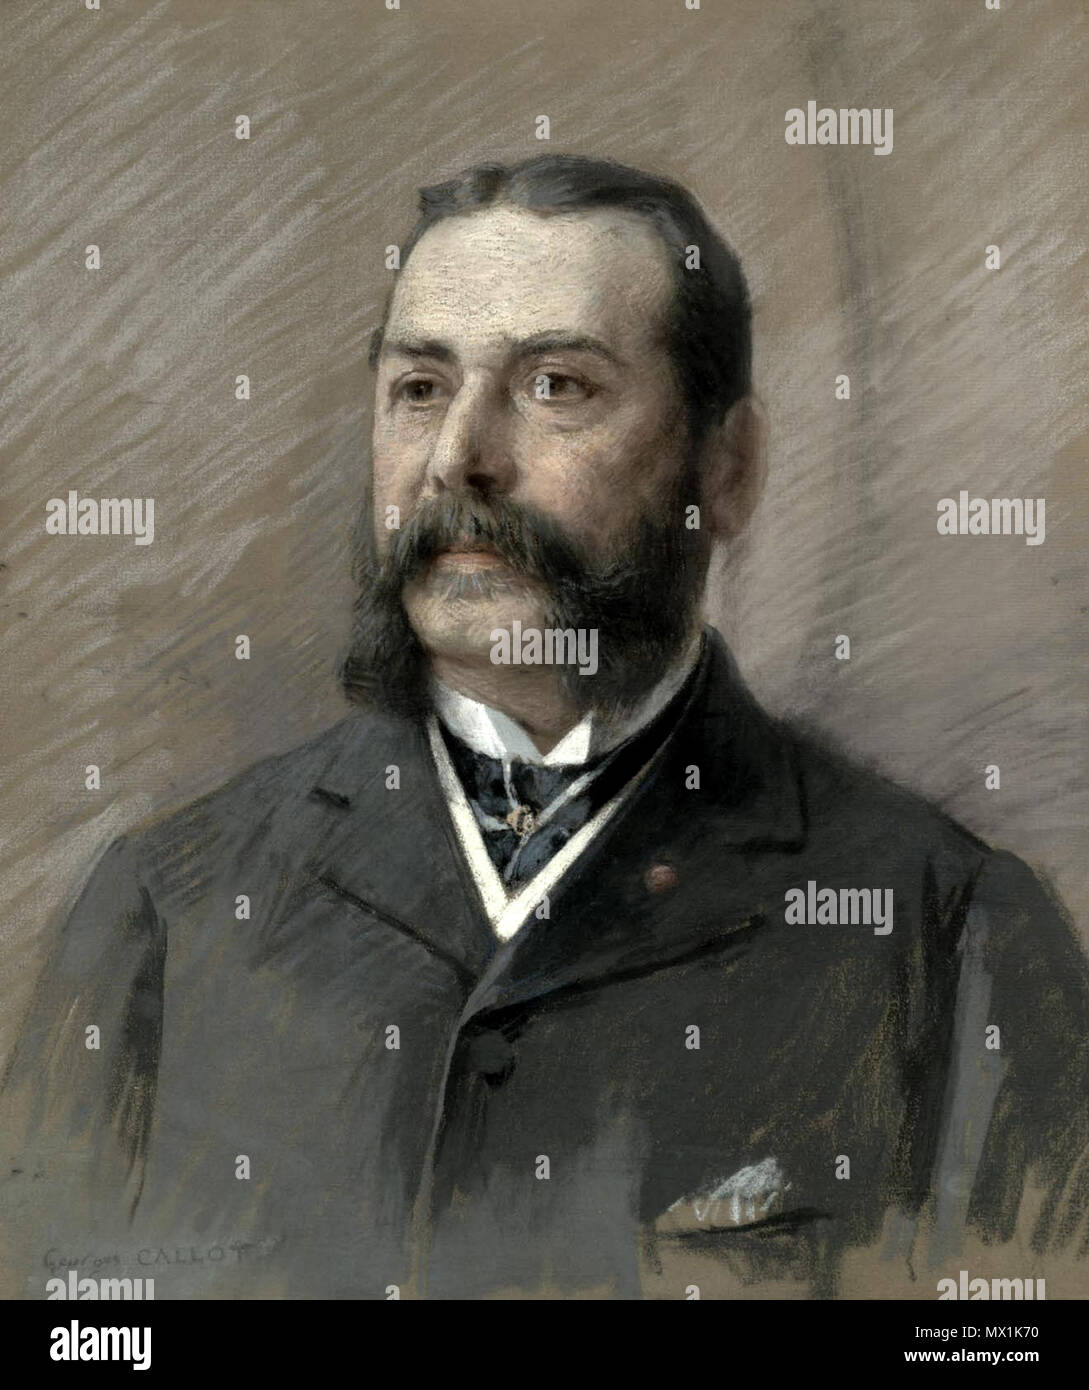 . Alexandru Lahovary . 1880s?. Georges Callot (1857-1903) 240 Georges Callot - Alexandru Lahovary Stock Photo